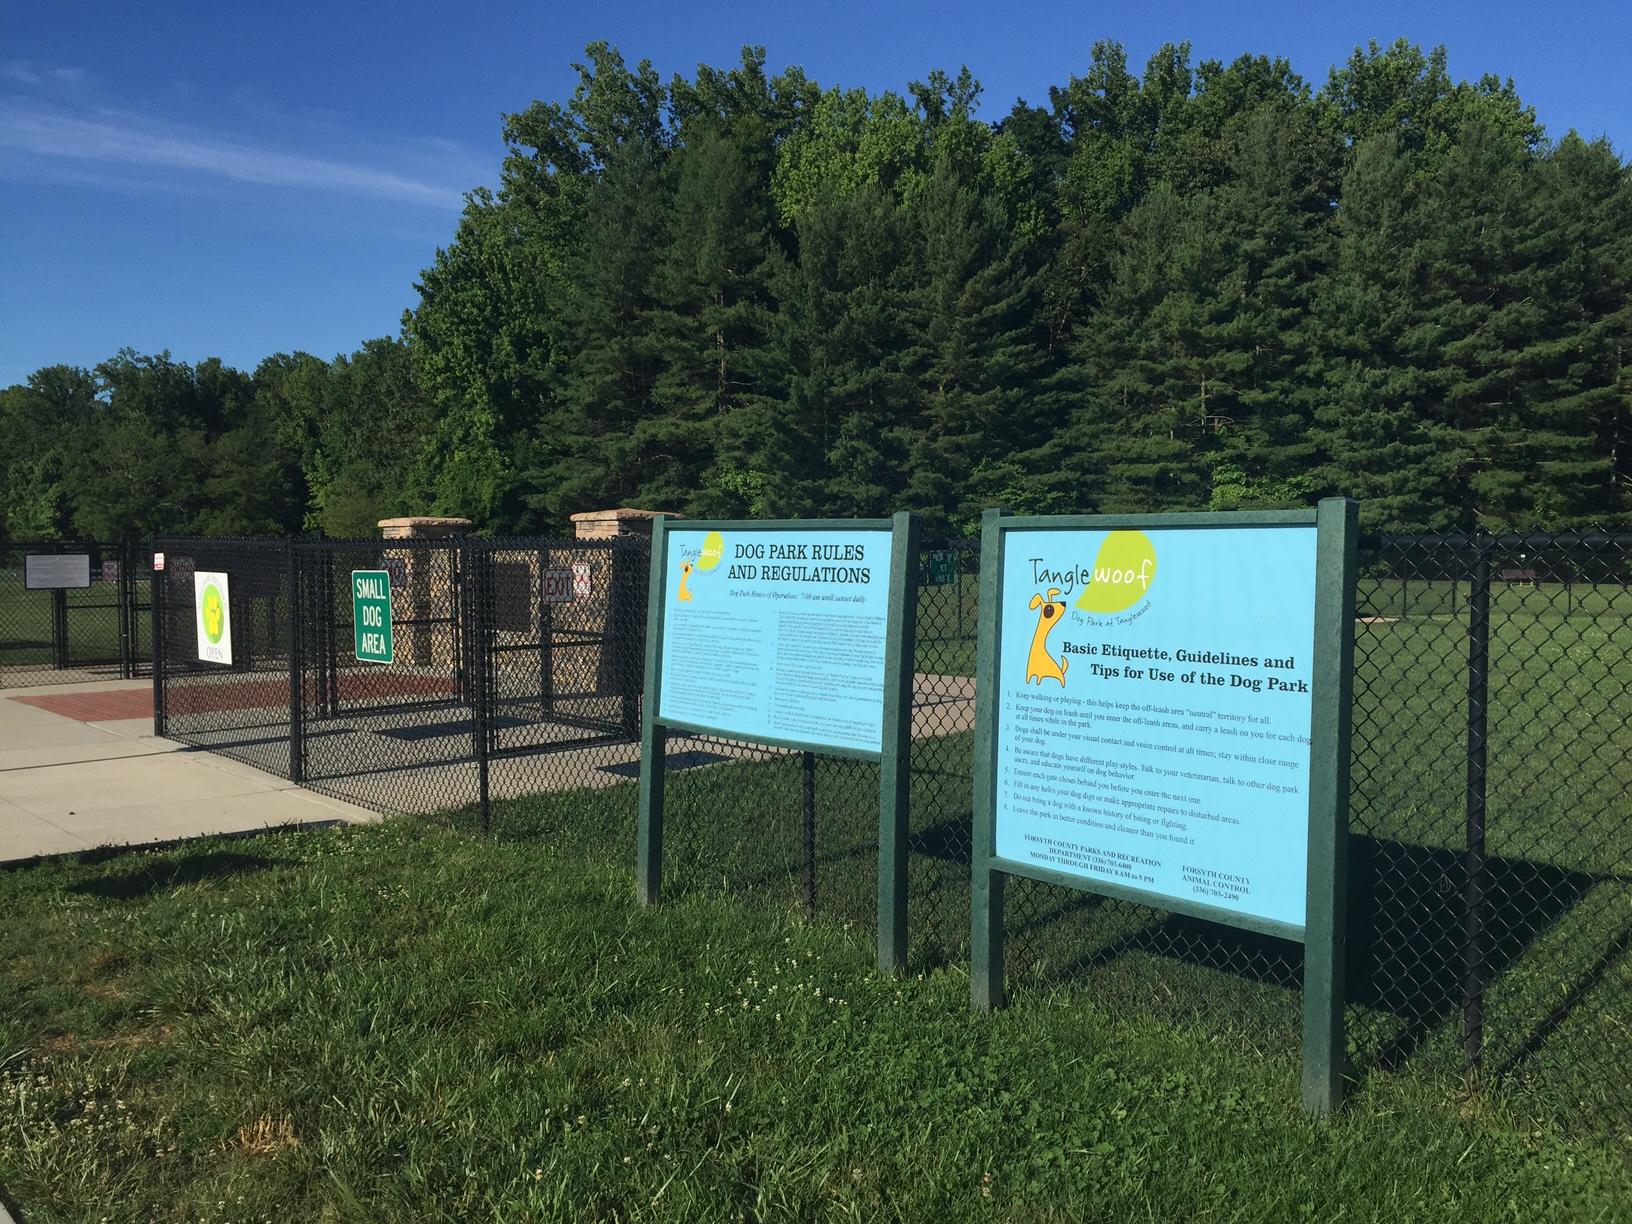 Pet Friendly Tanglewoof Dog Park at Tanglewood Park